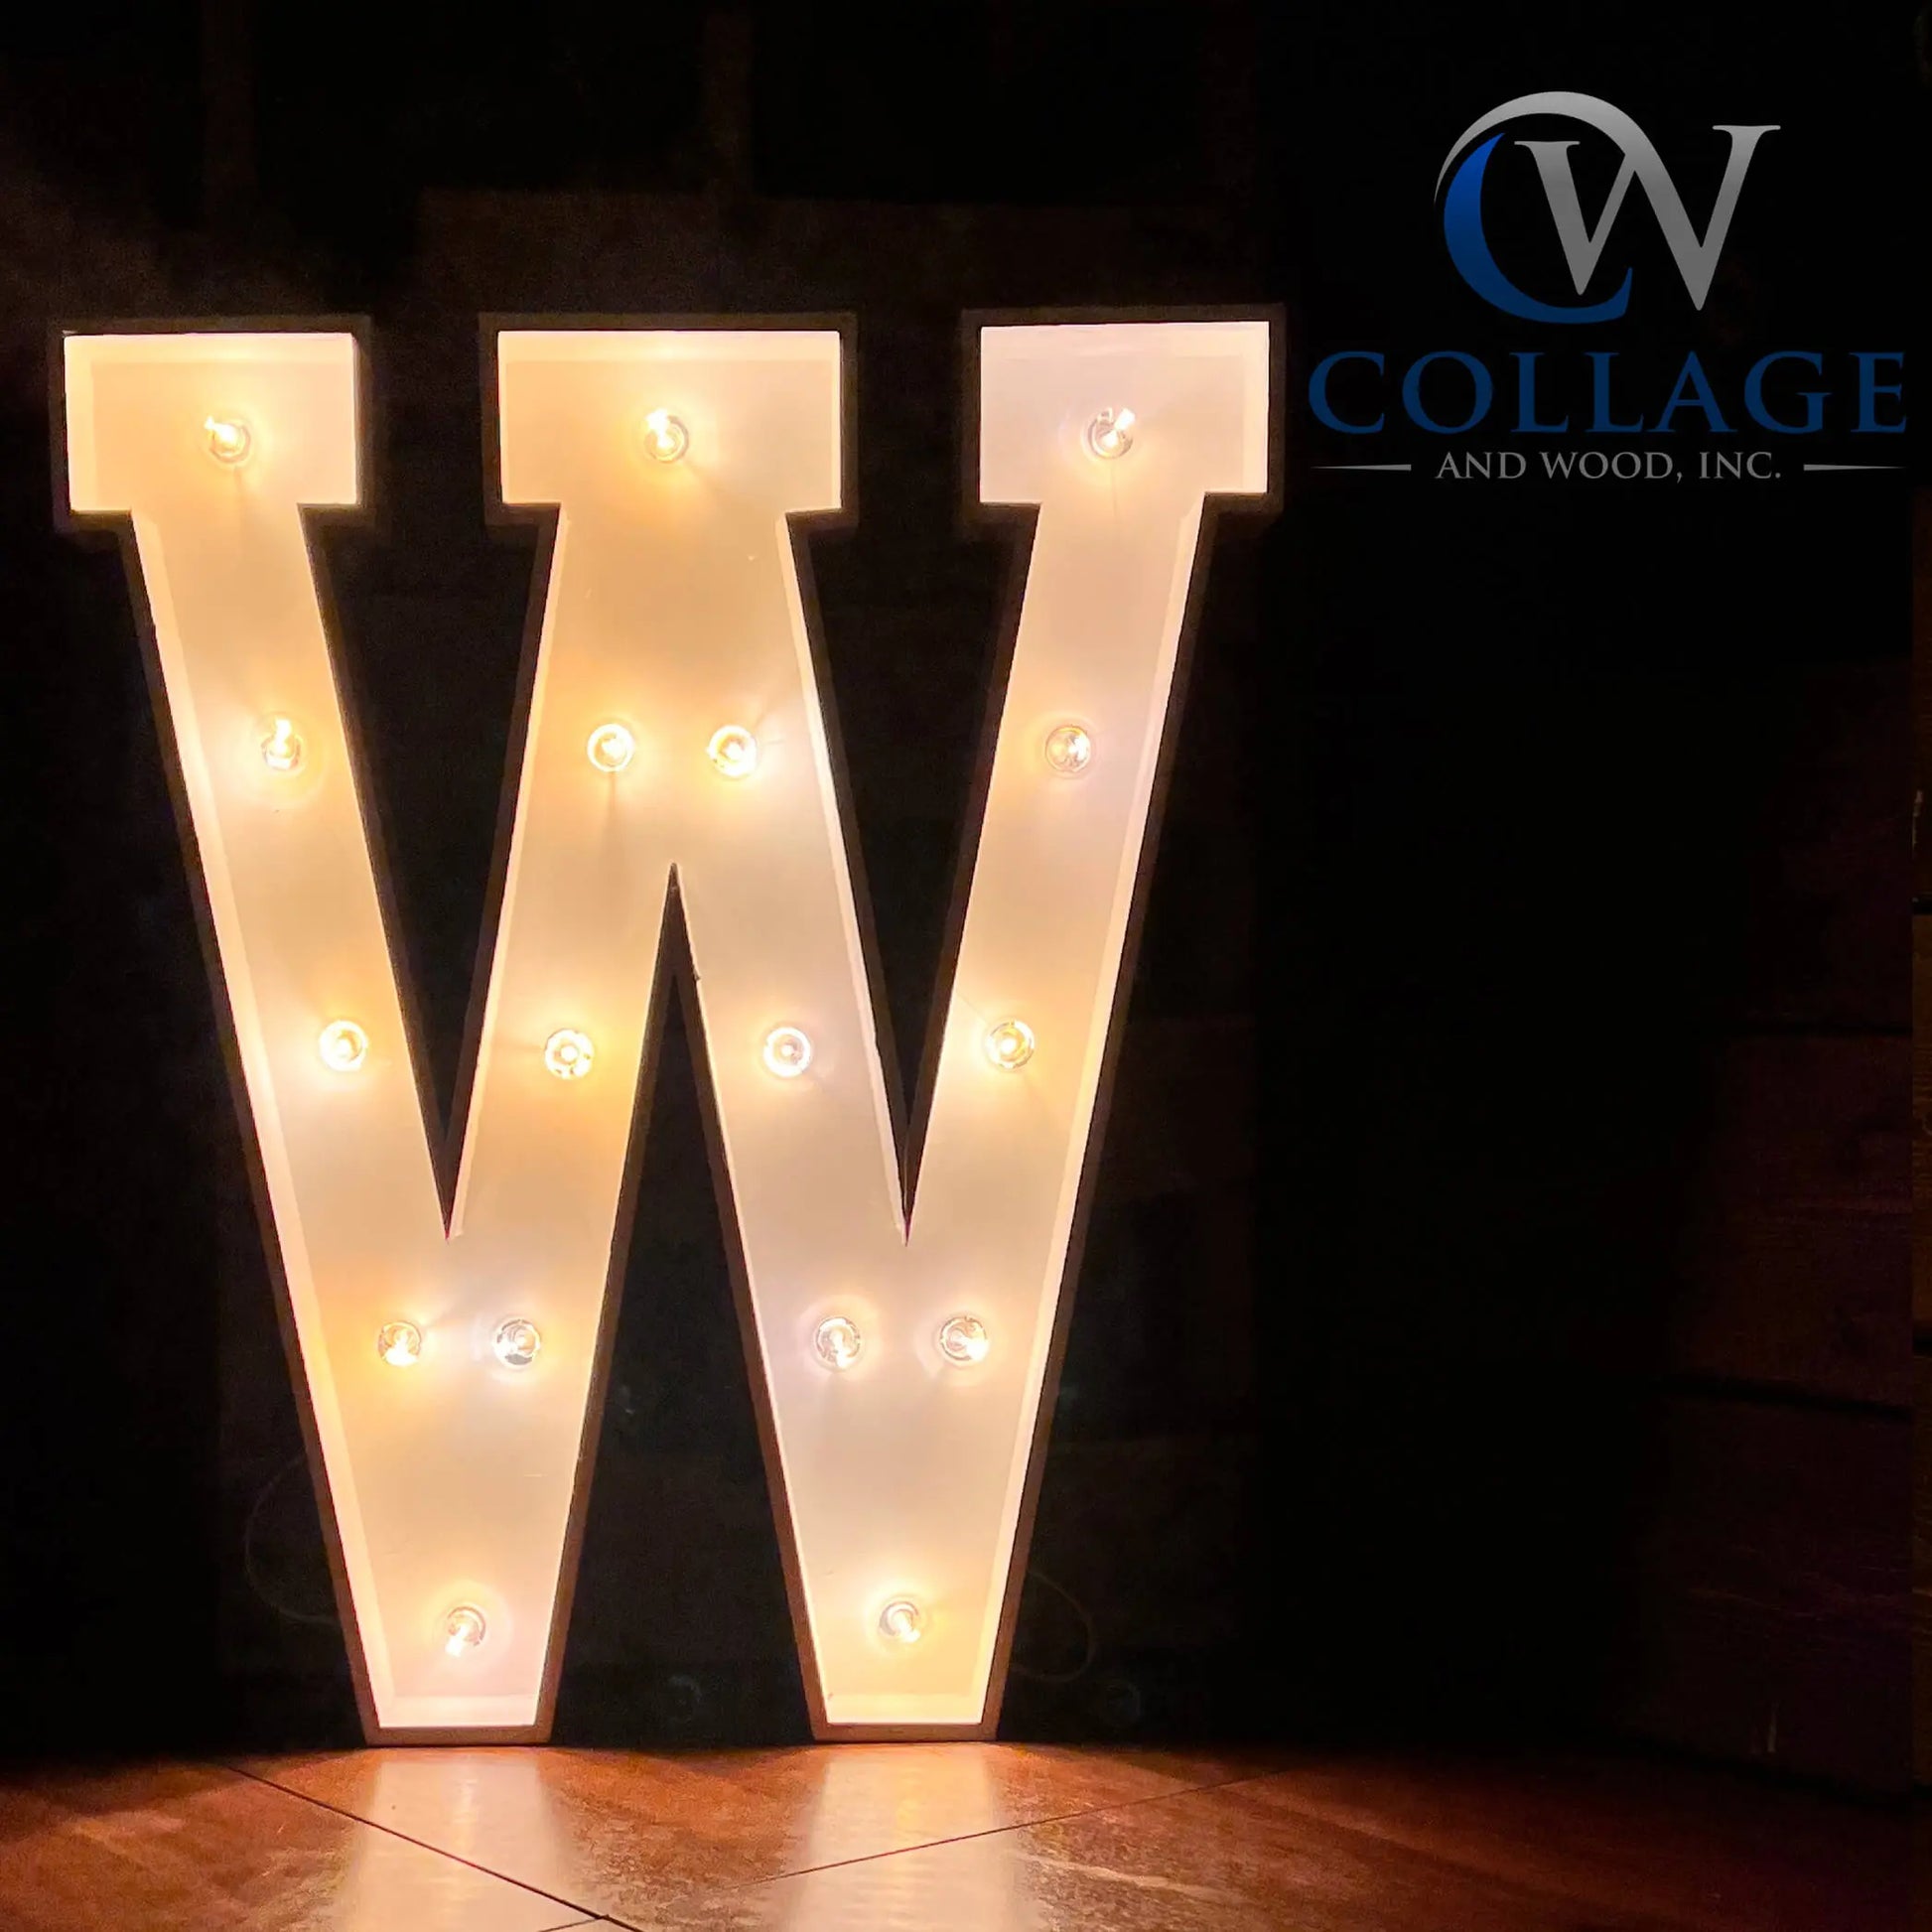 Wonderful 3-foot tall wooden marquee letter W, classically painted in white, adorned with sparkling battery-powered LED lights.